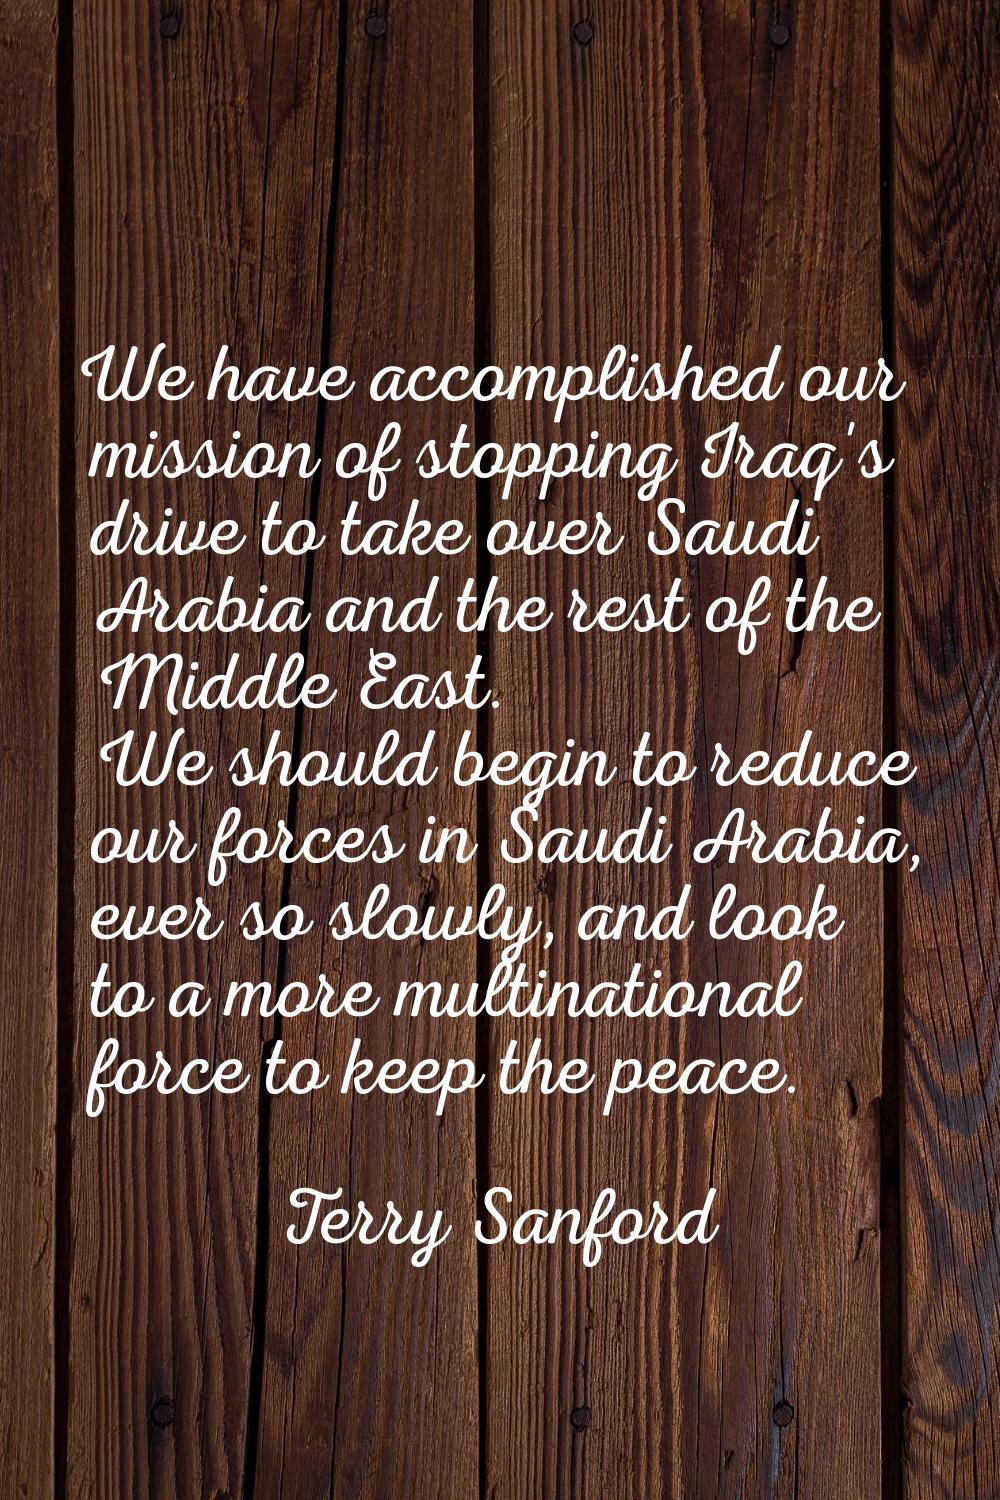 We have accomplished our mission of stopping Iraq's drive to take over Saudi Arabia and the rest of